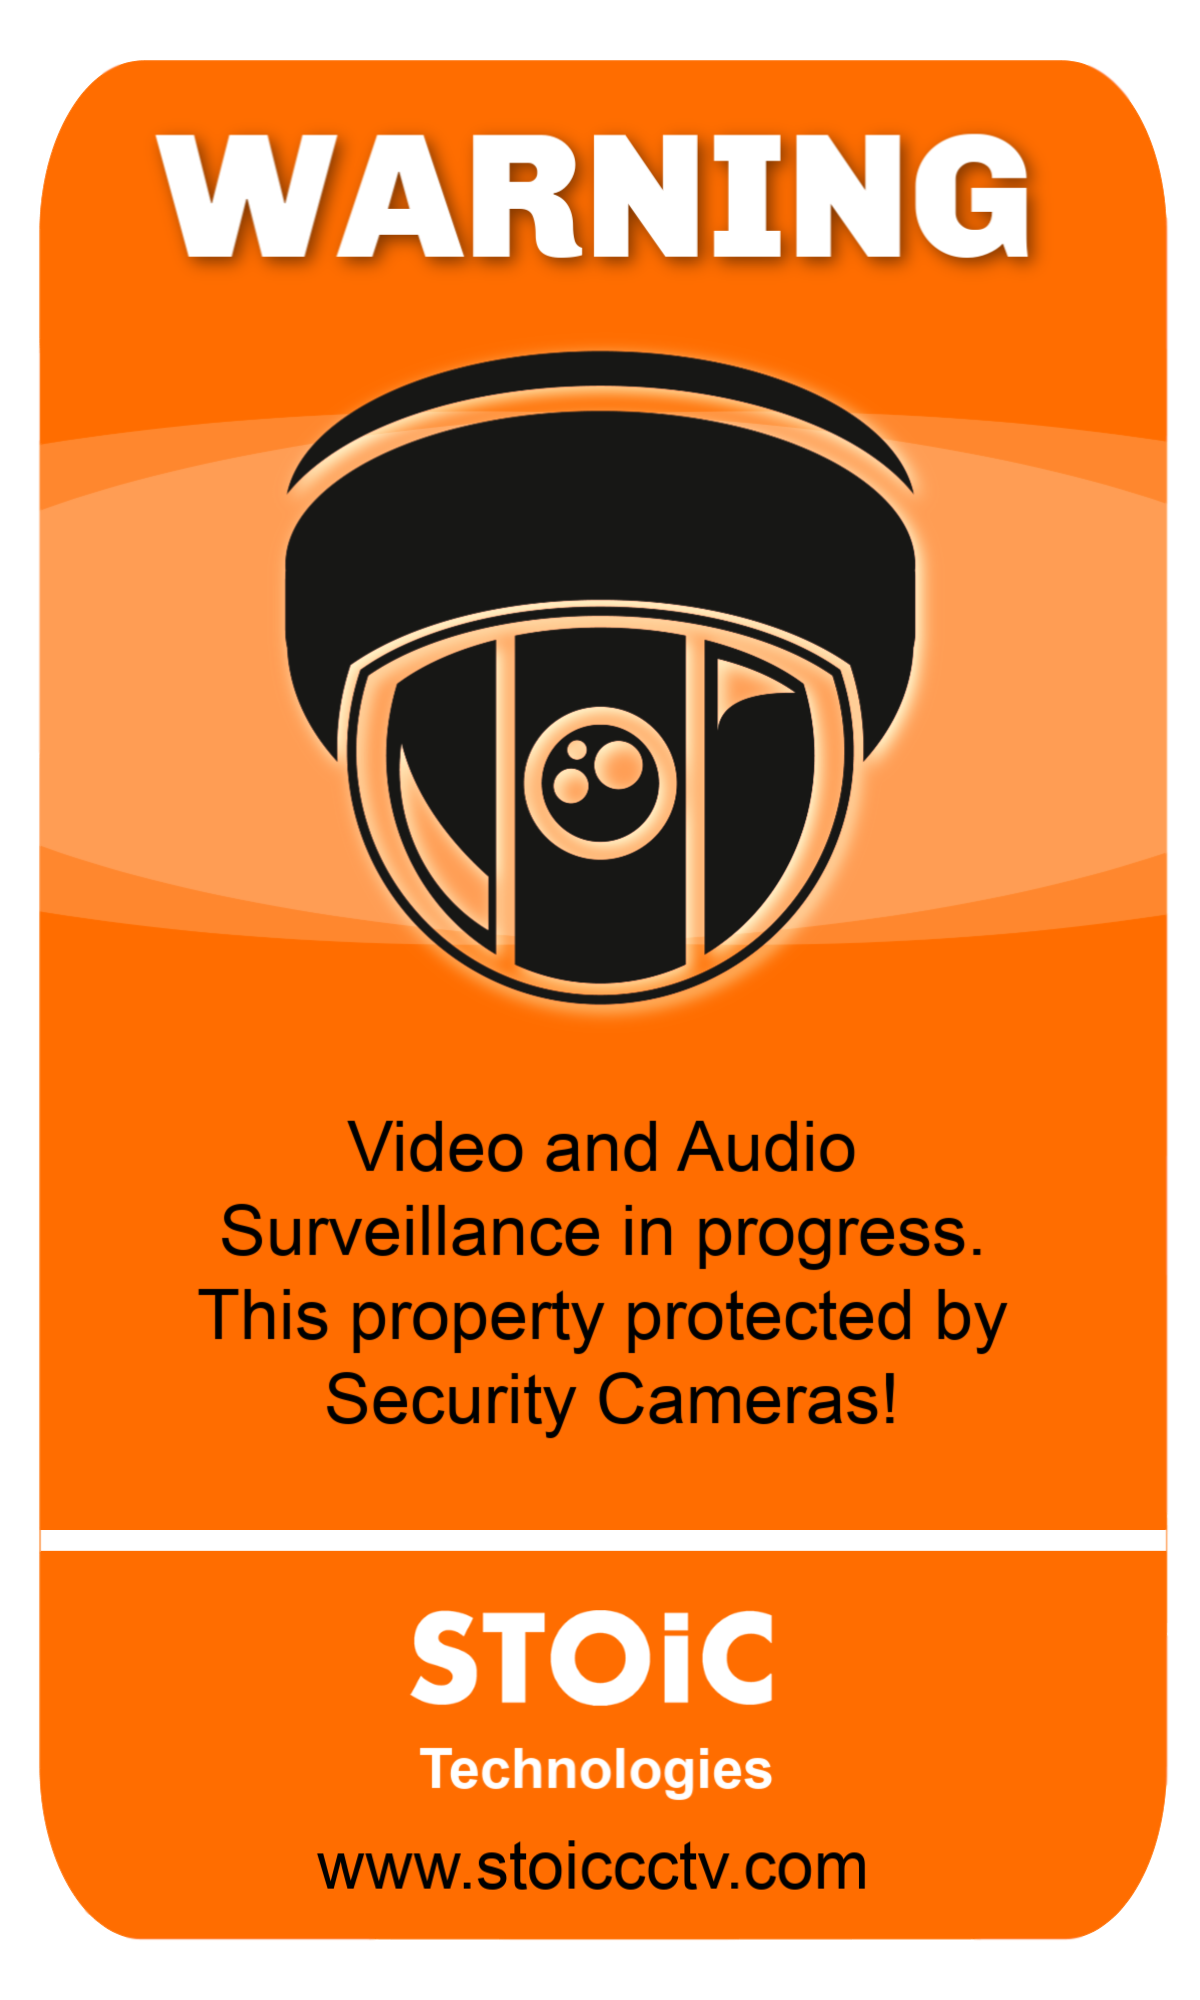 S11 A5 - CCTV Premises are Alarmed Sign Sticker 150mm x 200mm Camera 